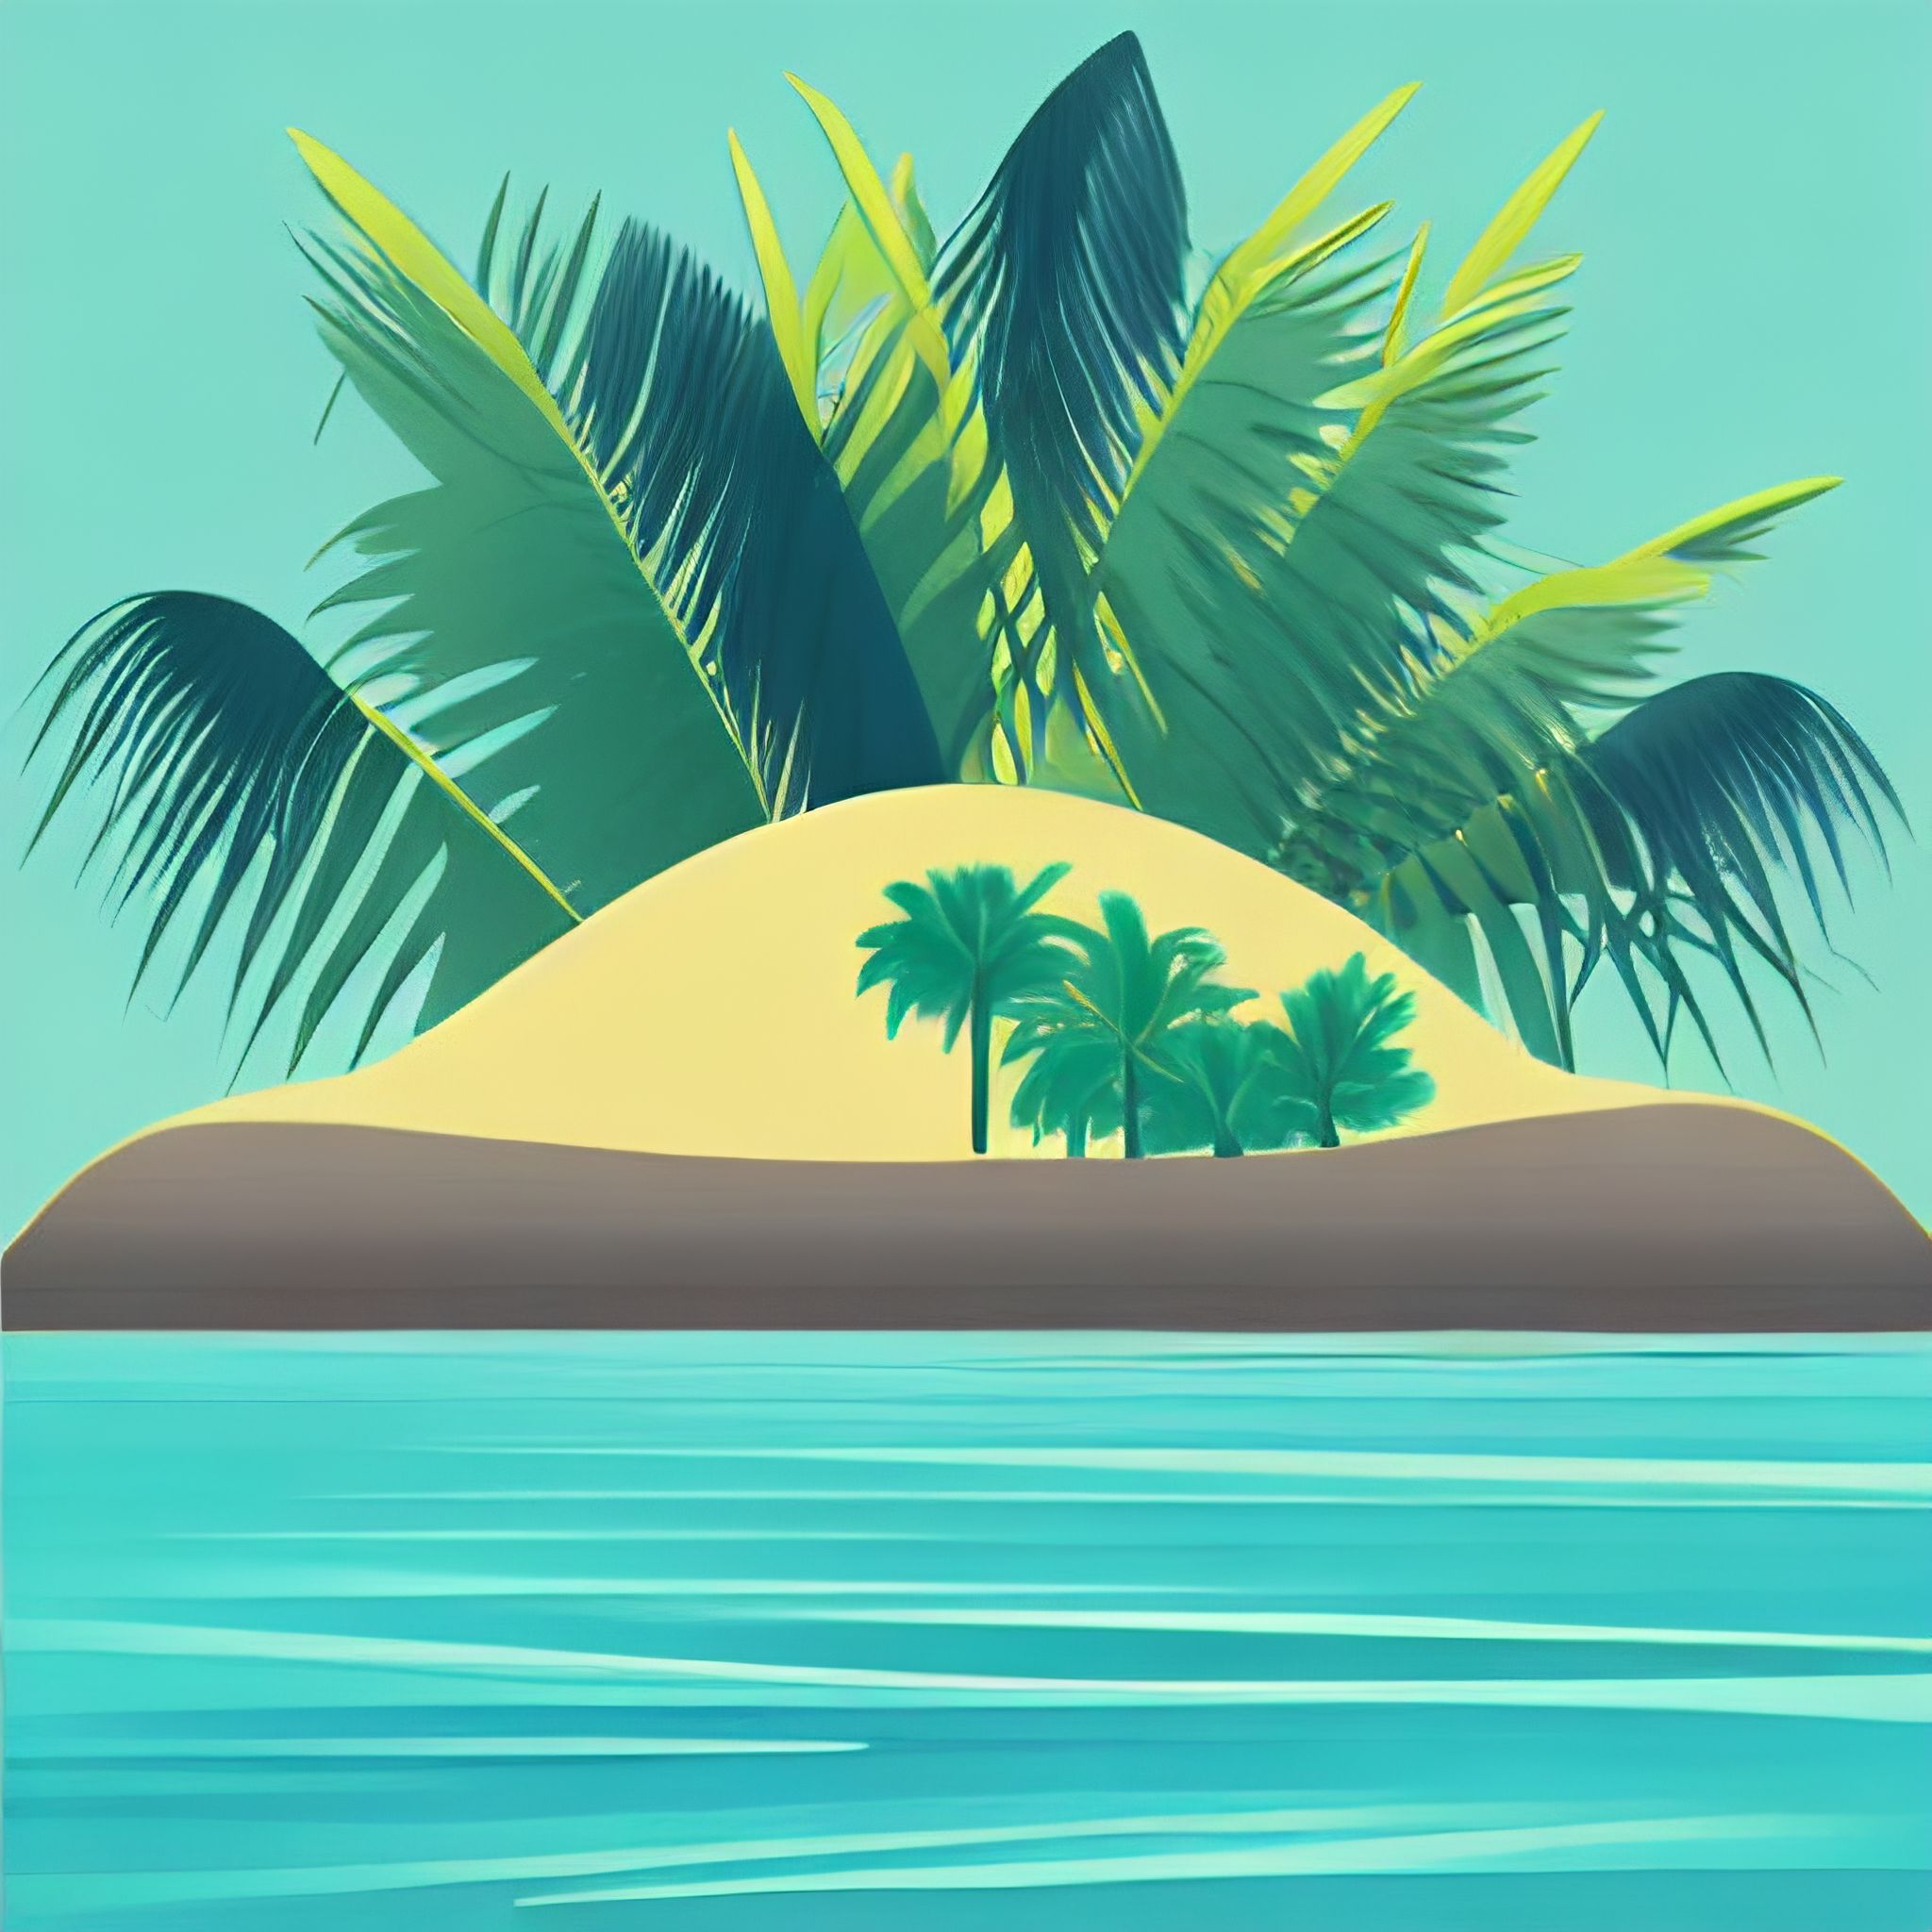 tropical island in the sun - minimalist surreal abstract landscape illustration